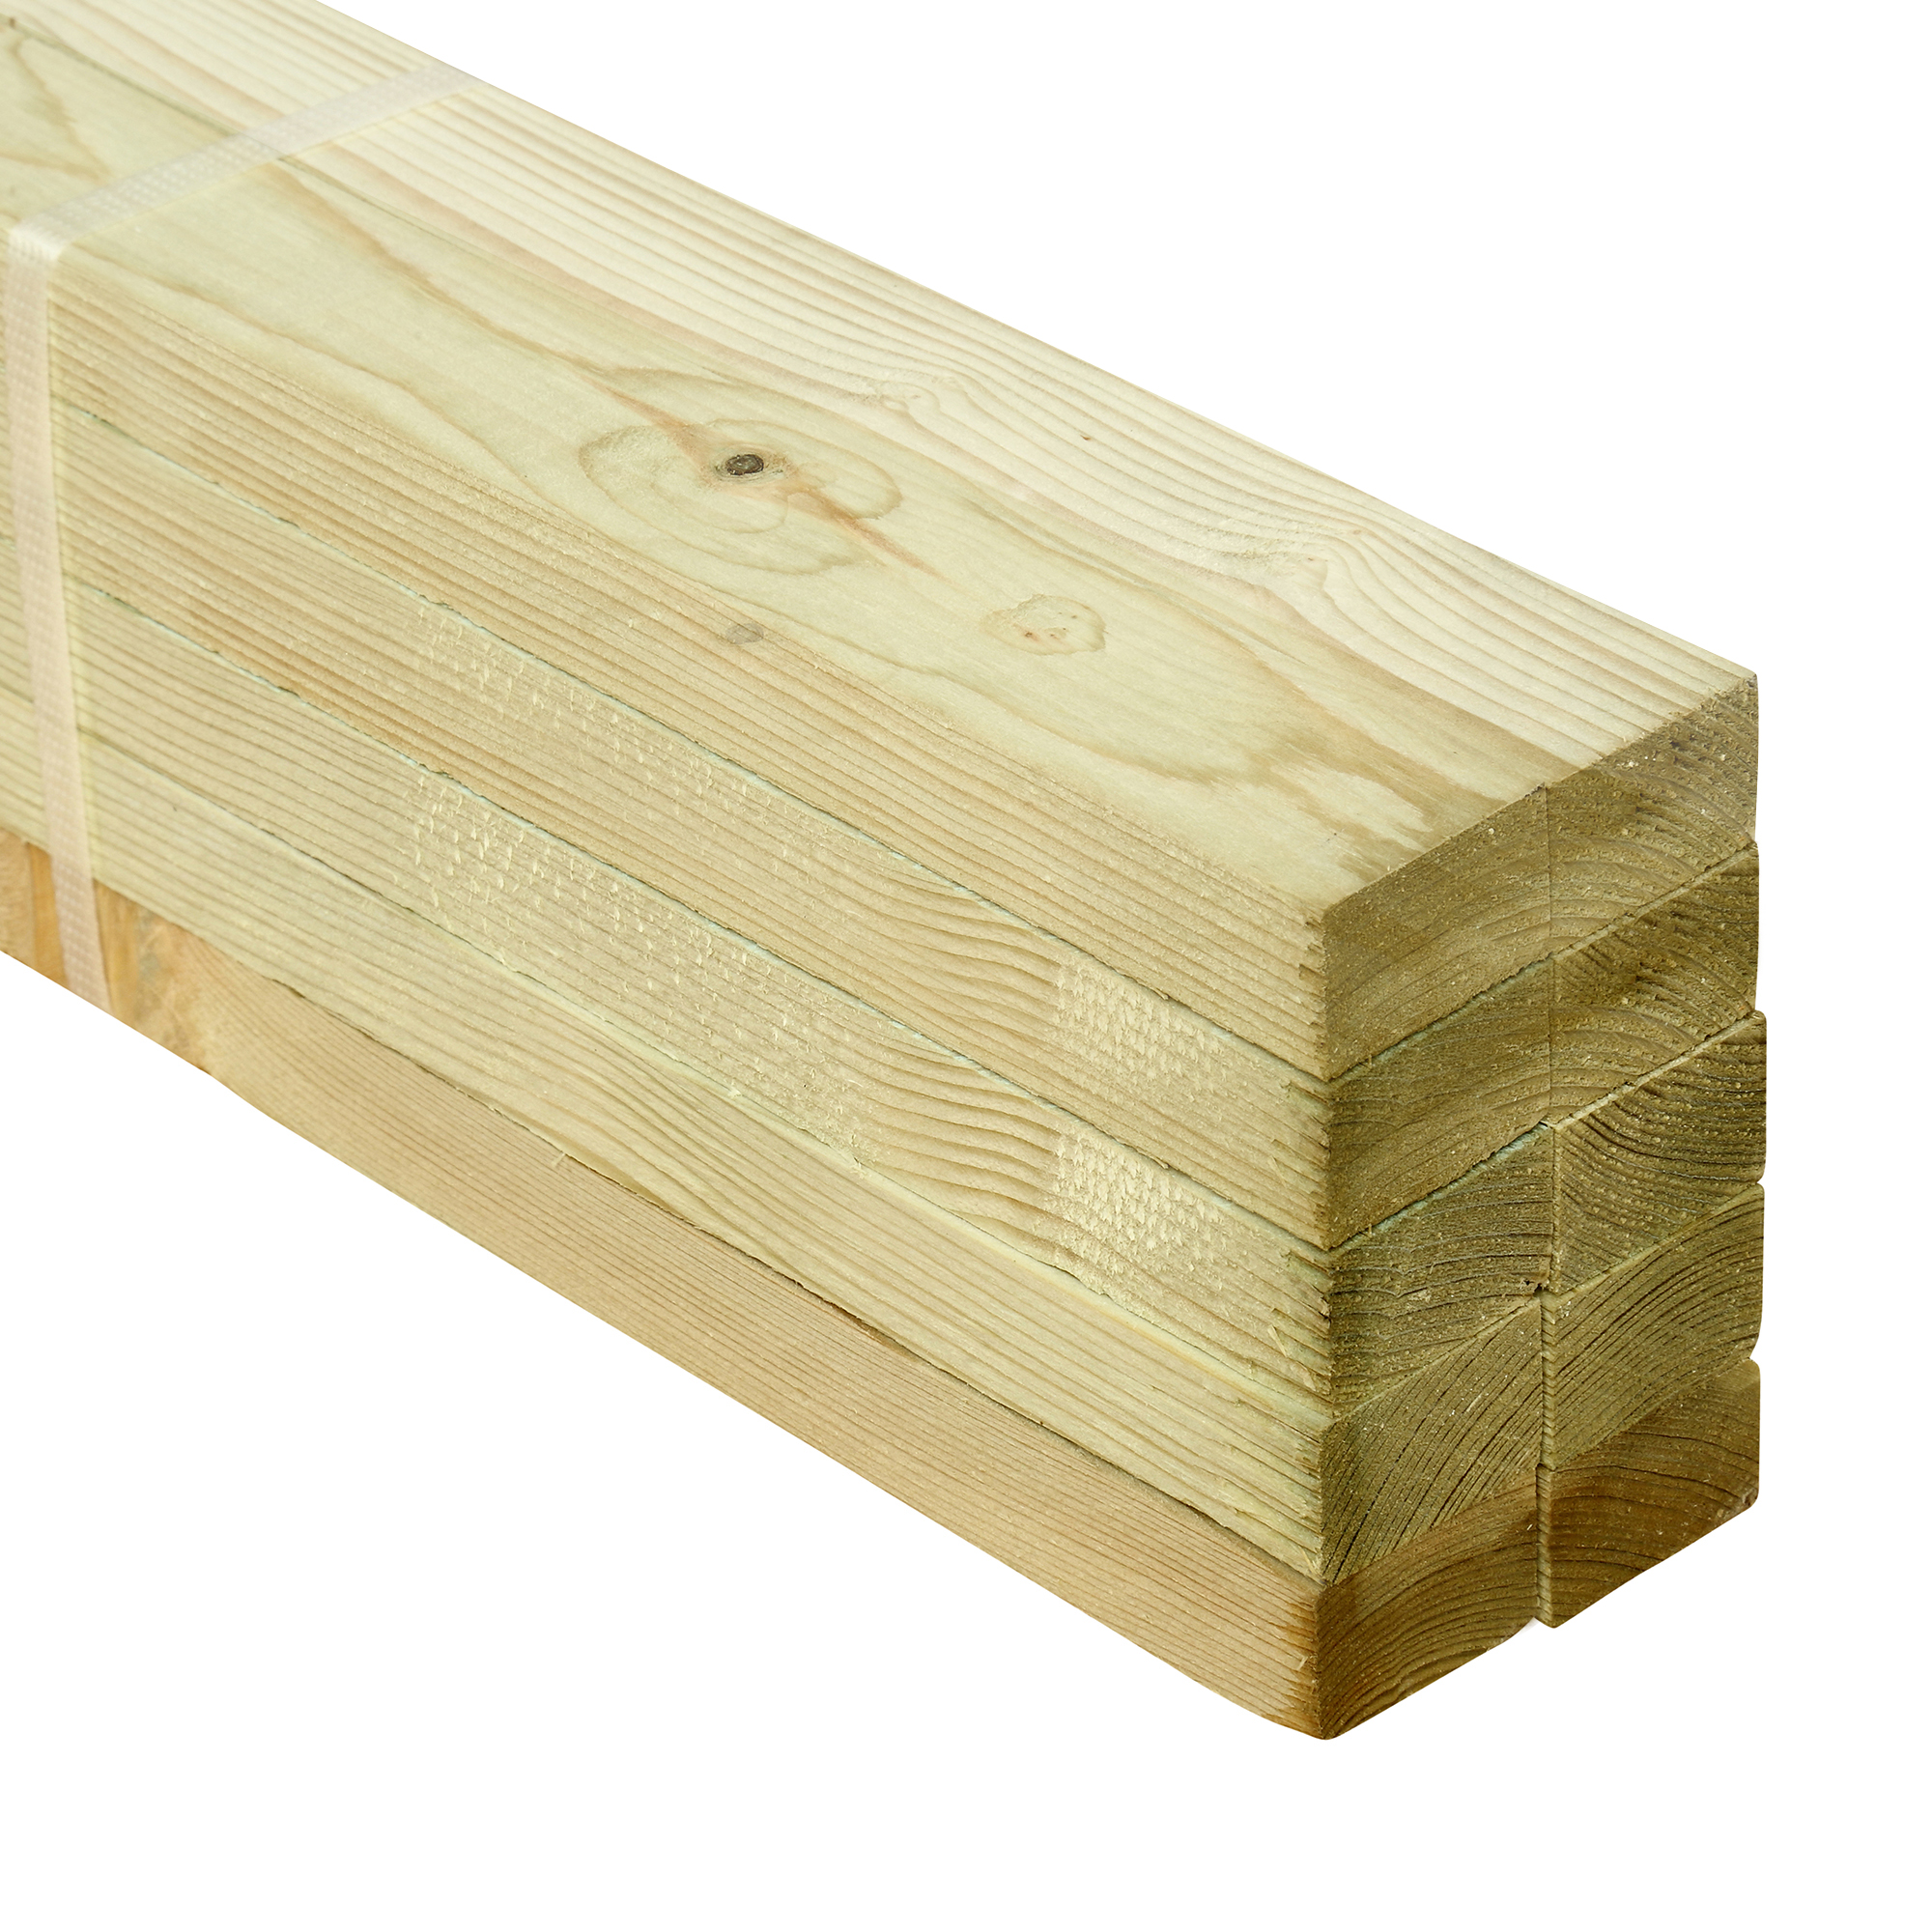 Image of Wickes Treated Sawn Timber - 19 x 38 x 1800mm - Pack 10